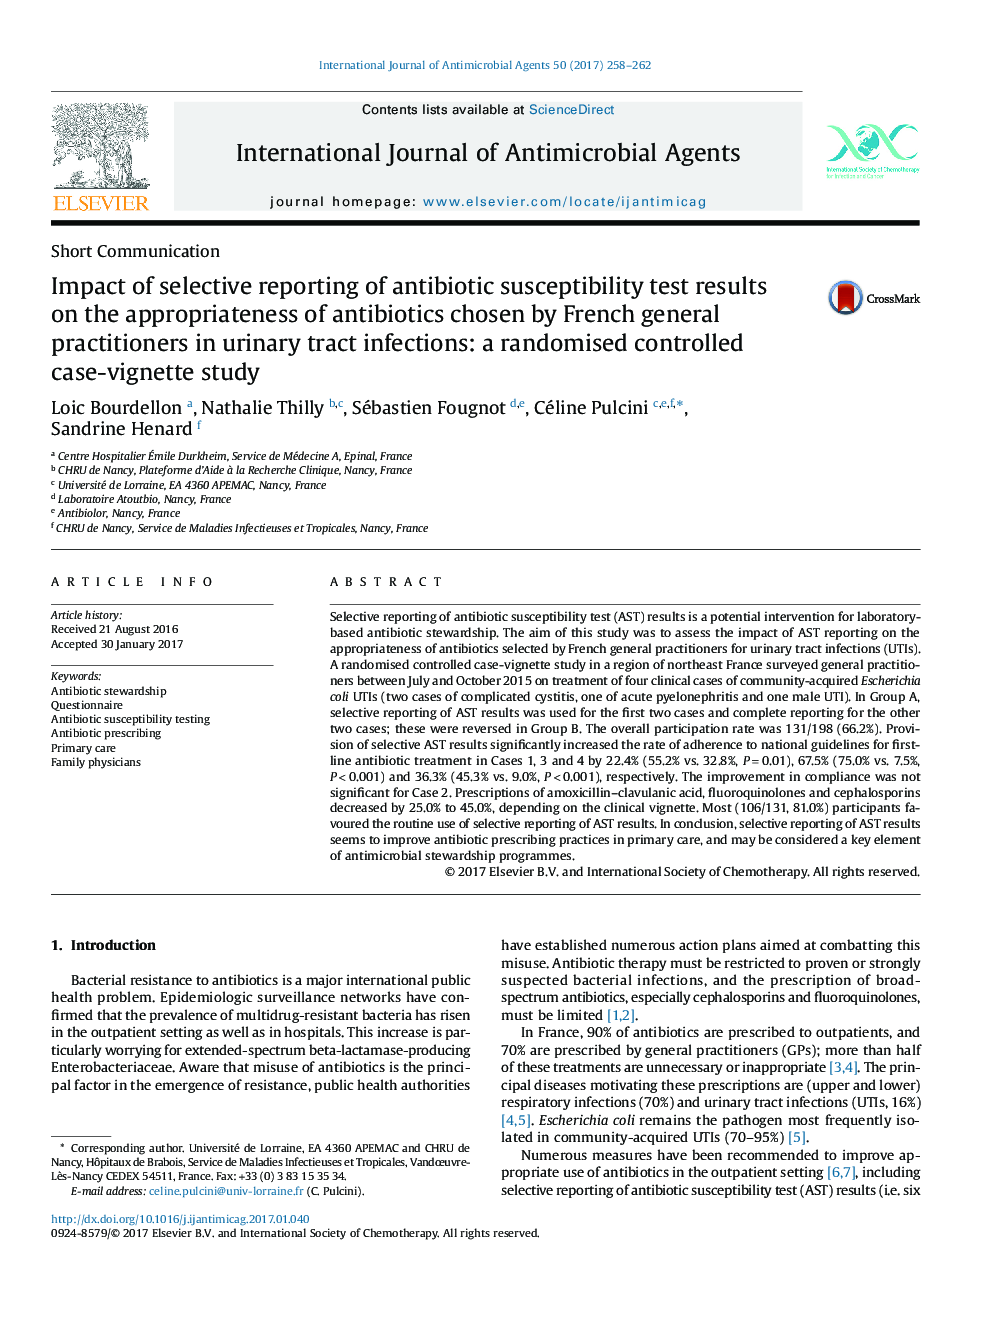 Impact of selective reporting of antibiotic susceptibility test results on the appropriateness of antibiotics chosen by French general practitioners in urinary tract infections: a randomised controlled case-vignette study